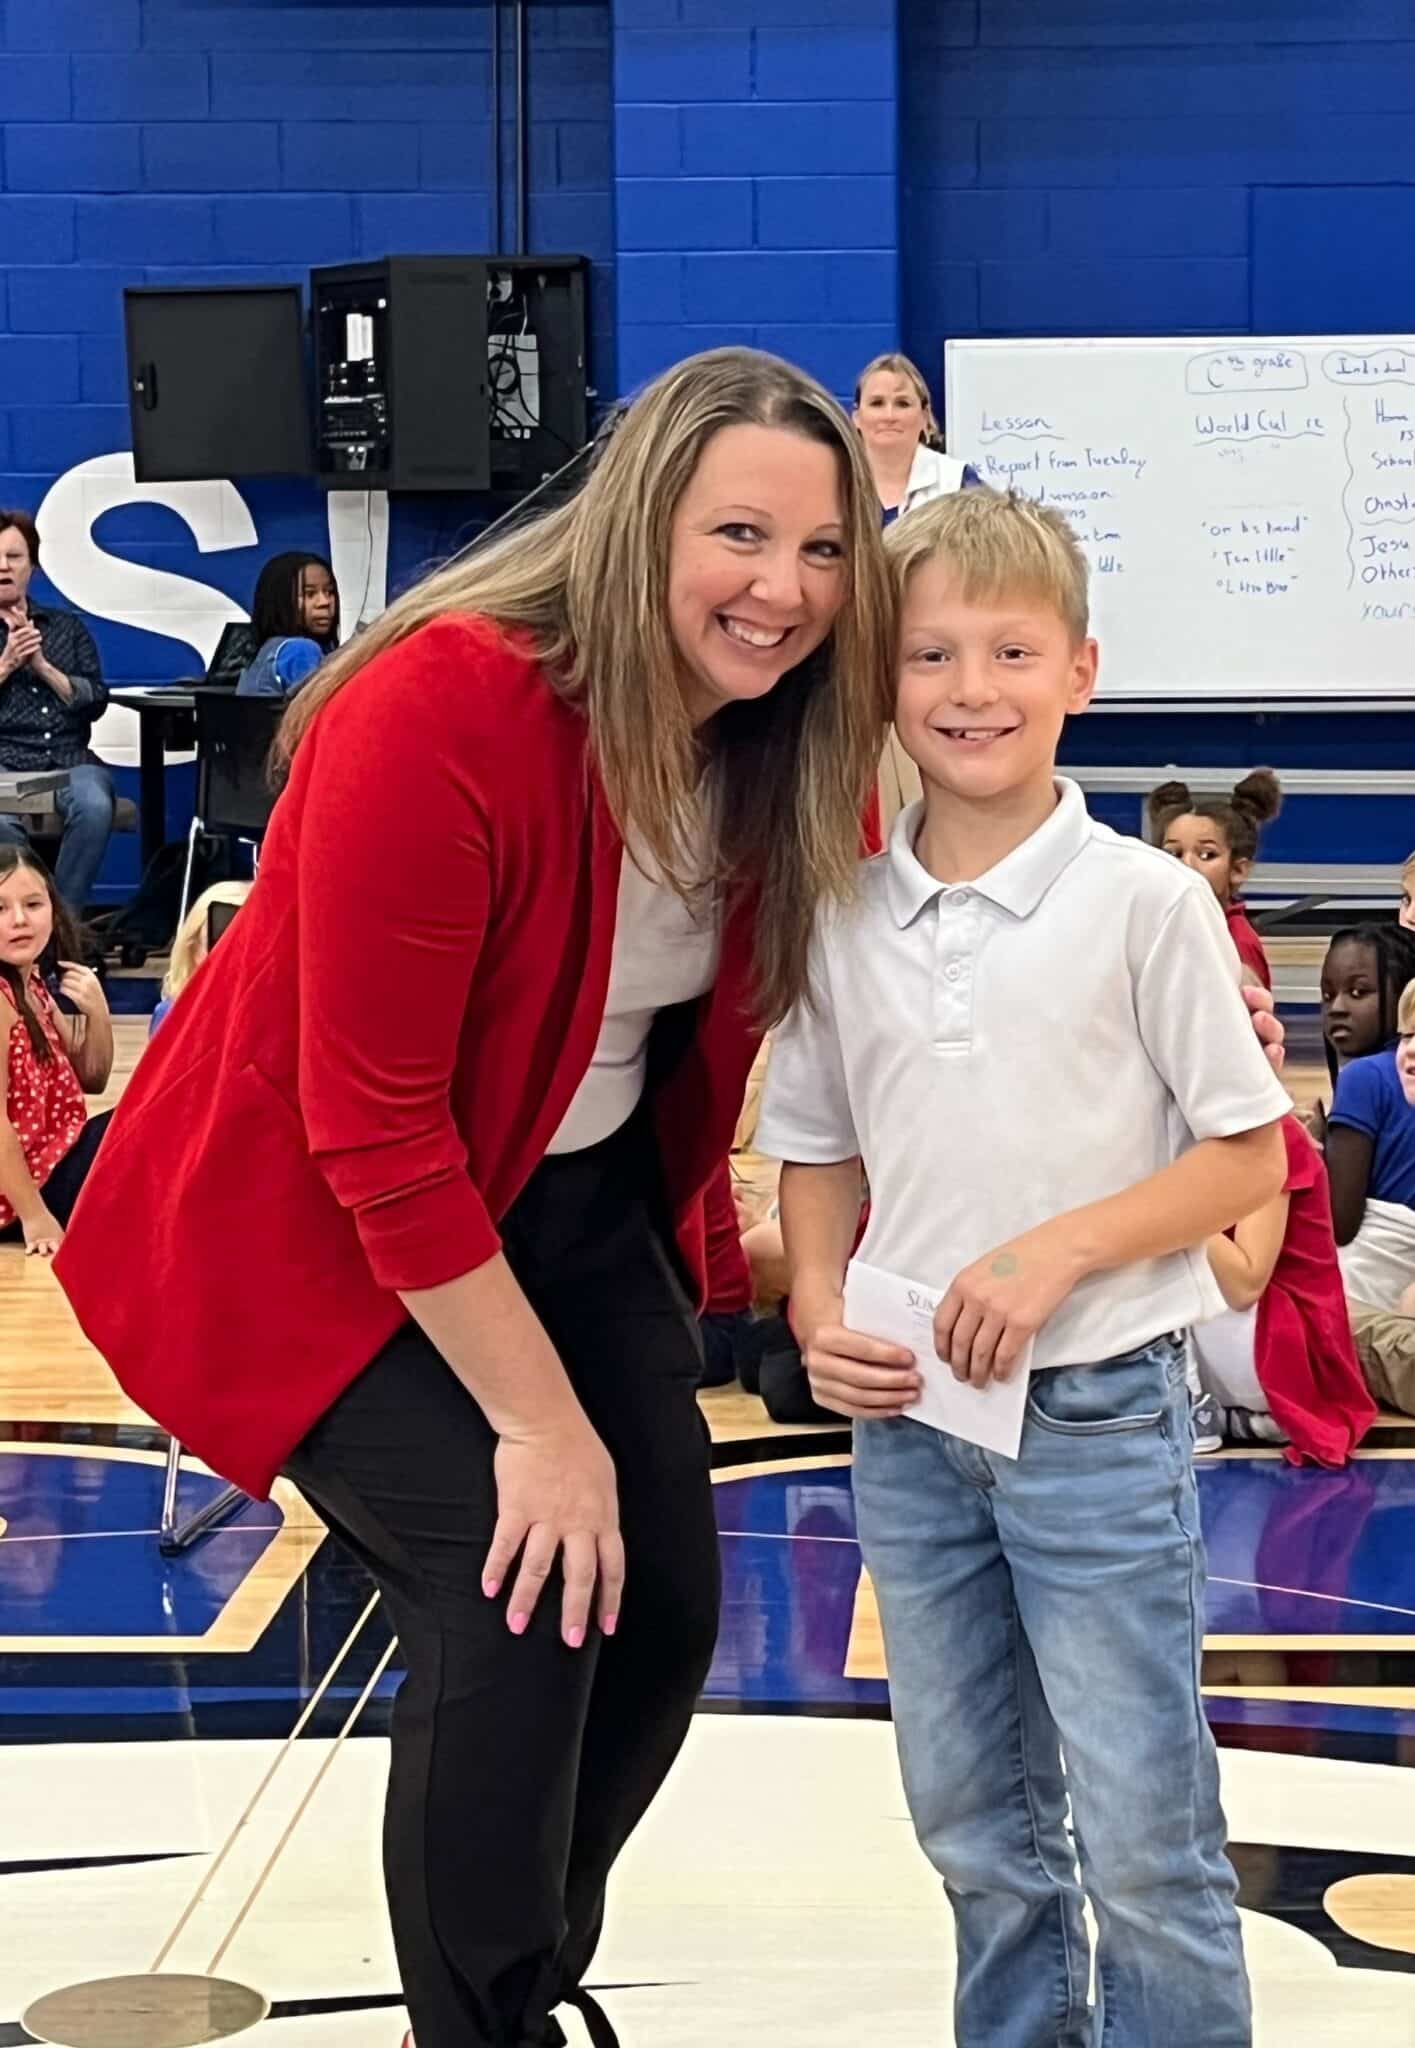 SCA fourth grade student Logan Lee, pictured with Upper Elementary Principal Dr. Julie Madsen, received the Upper Elementary Christian Character Award for the first quarter.